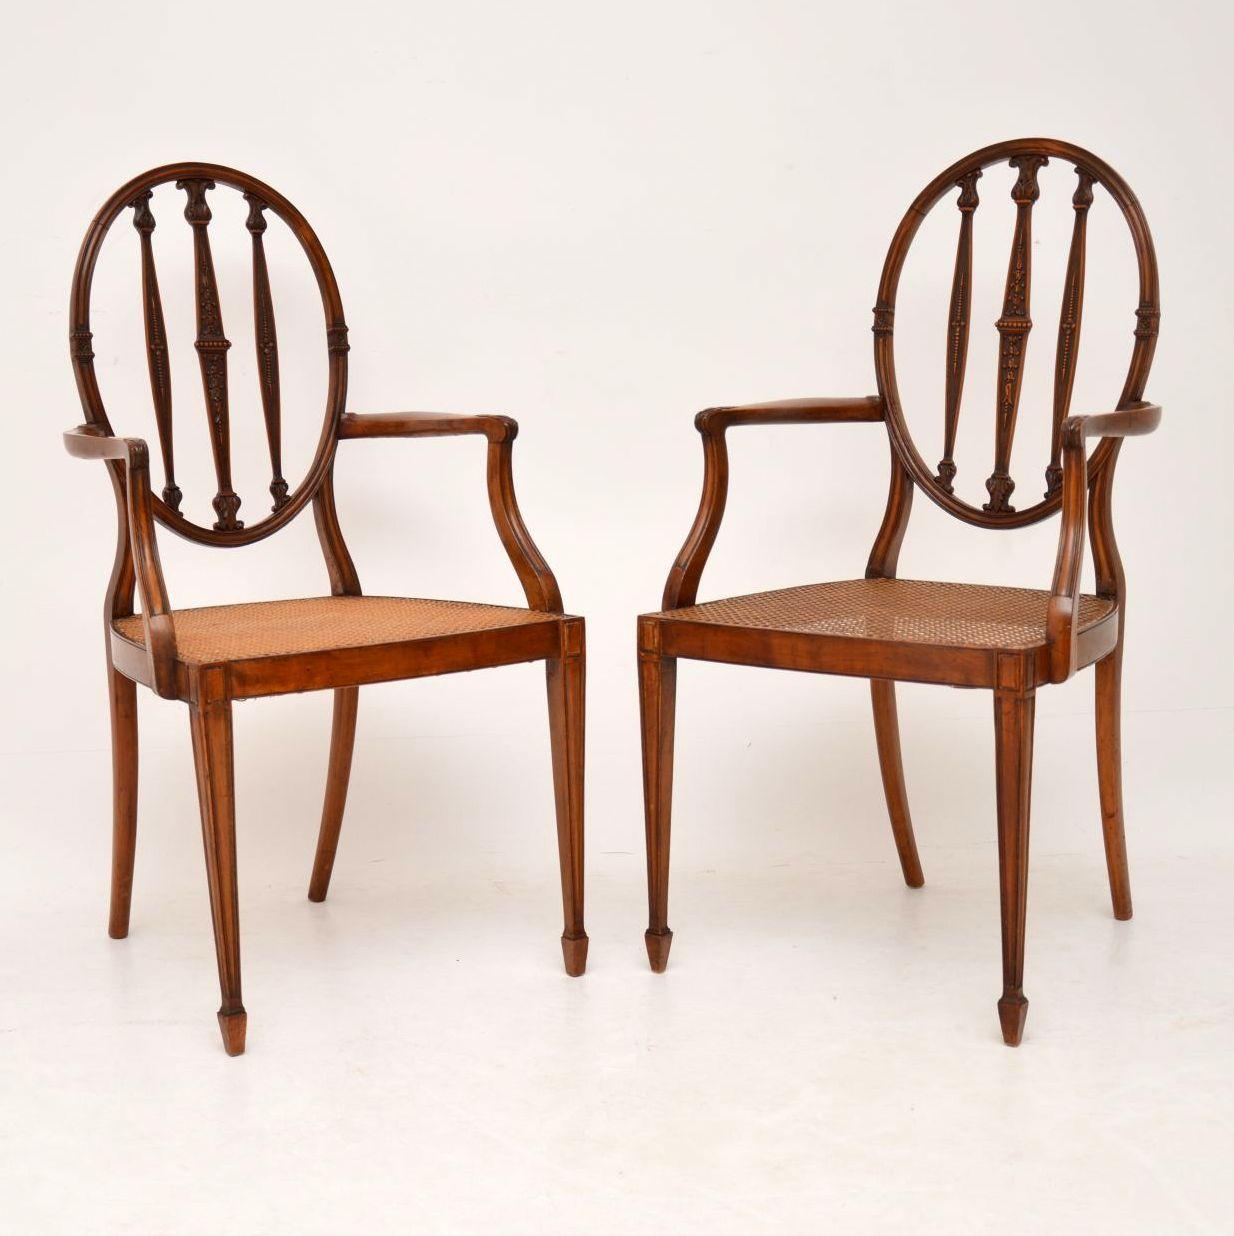 Very elegant & fine quality pair of antique Edwardian Satinwood armchairs of Sheraton design, dating from the 1900-10 period & in excellent condition.

They have oval backs, with intricately carved upright bars & cane seats that are also in good